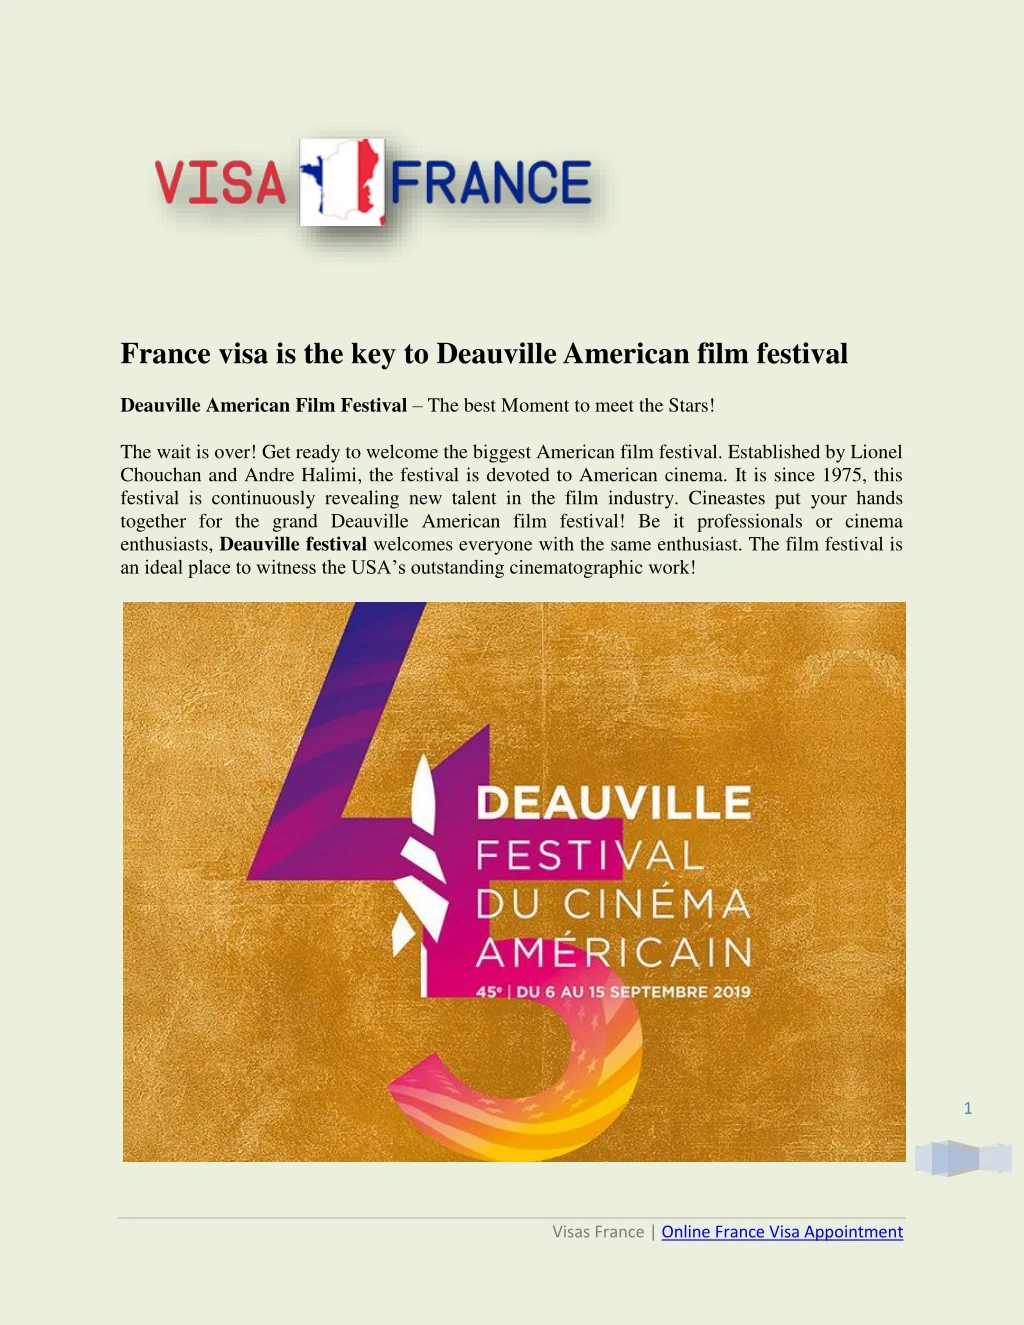 france visa is the key to deauville american film